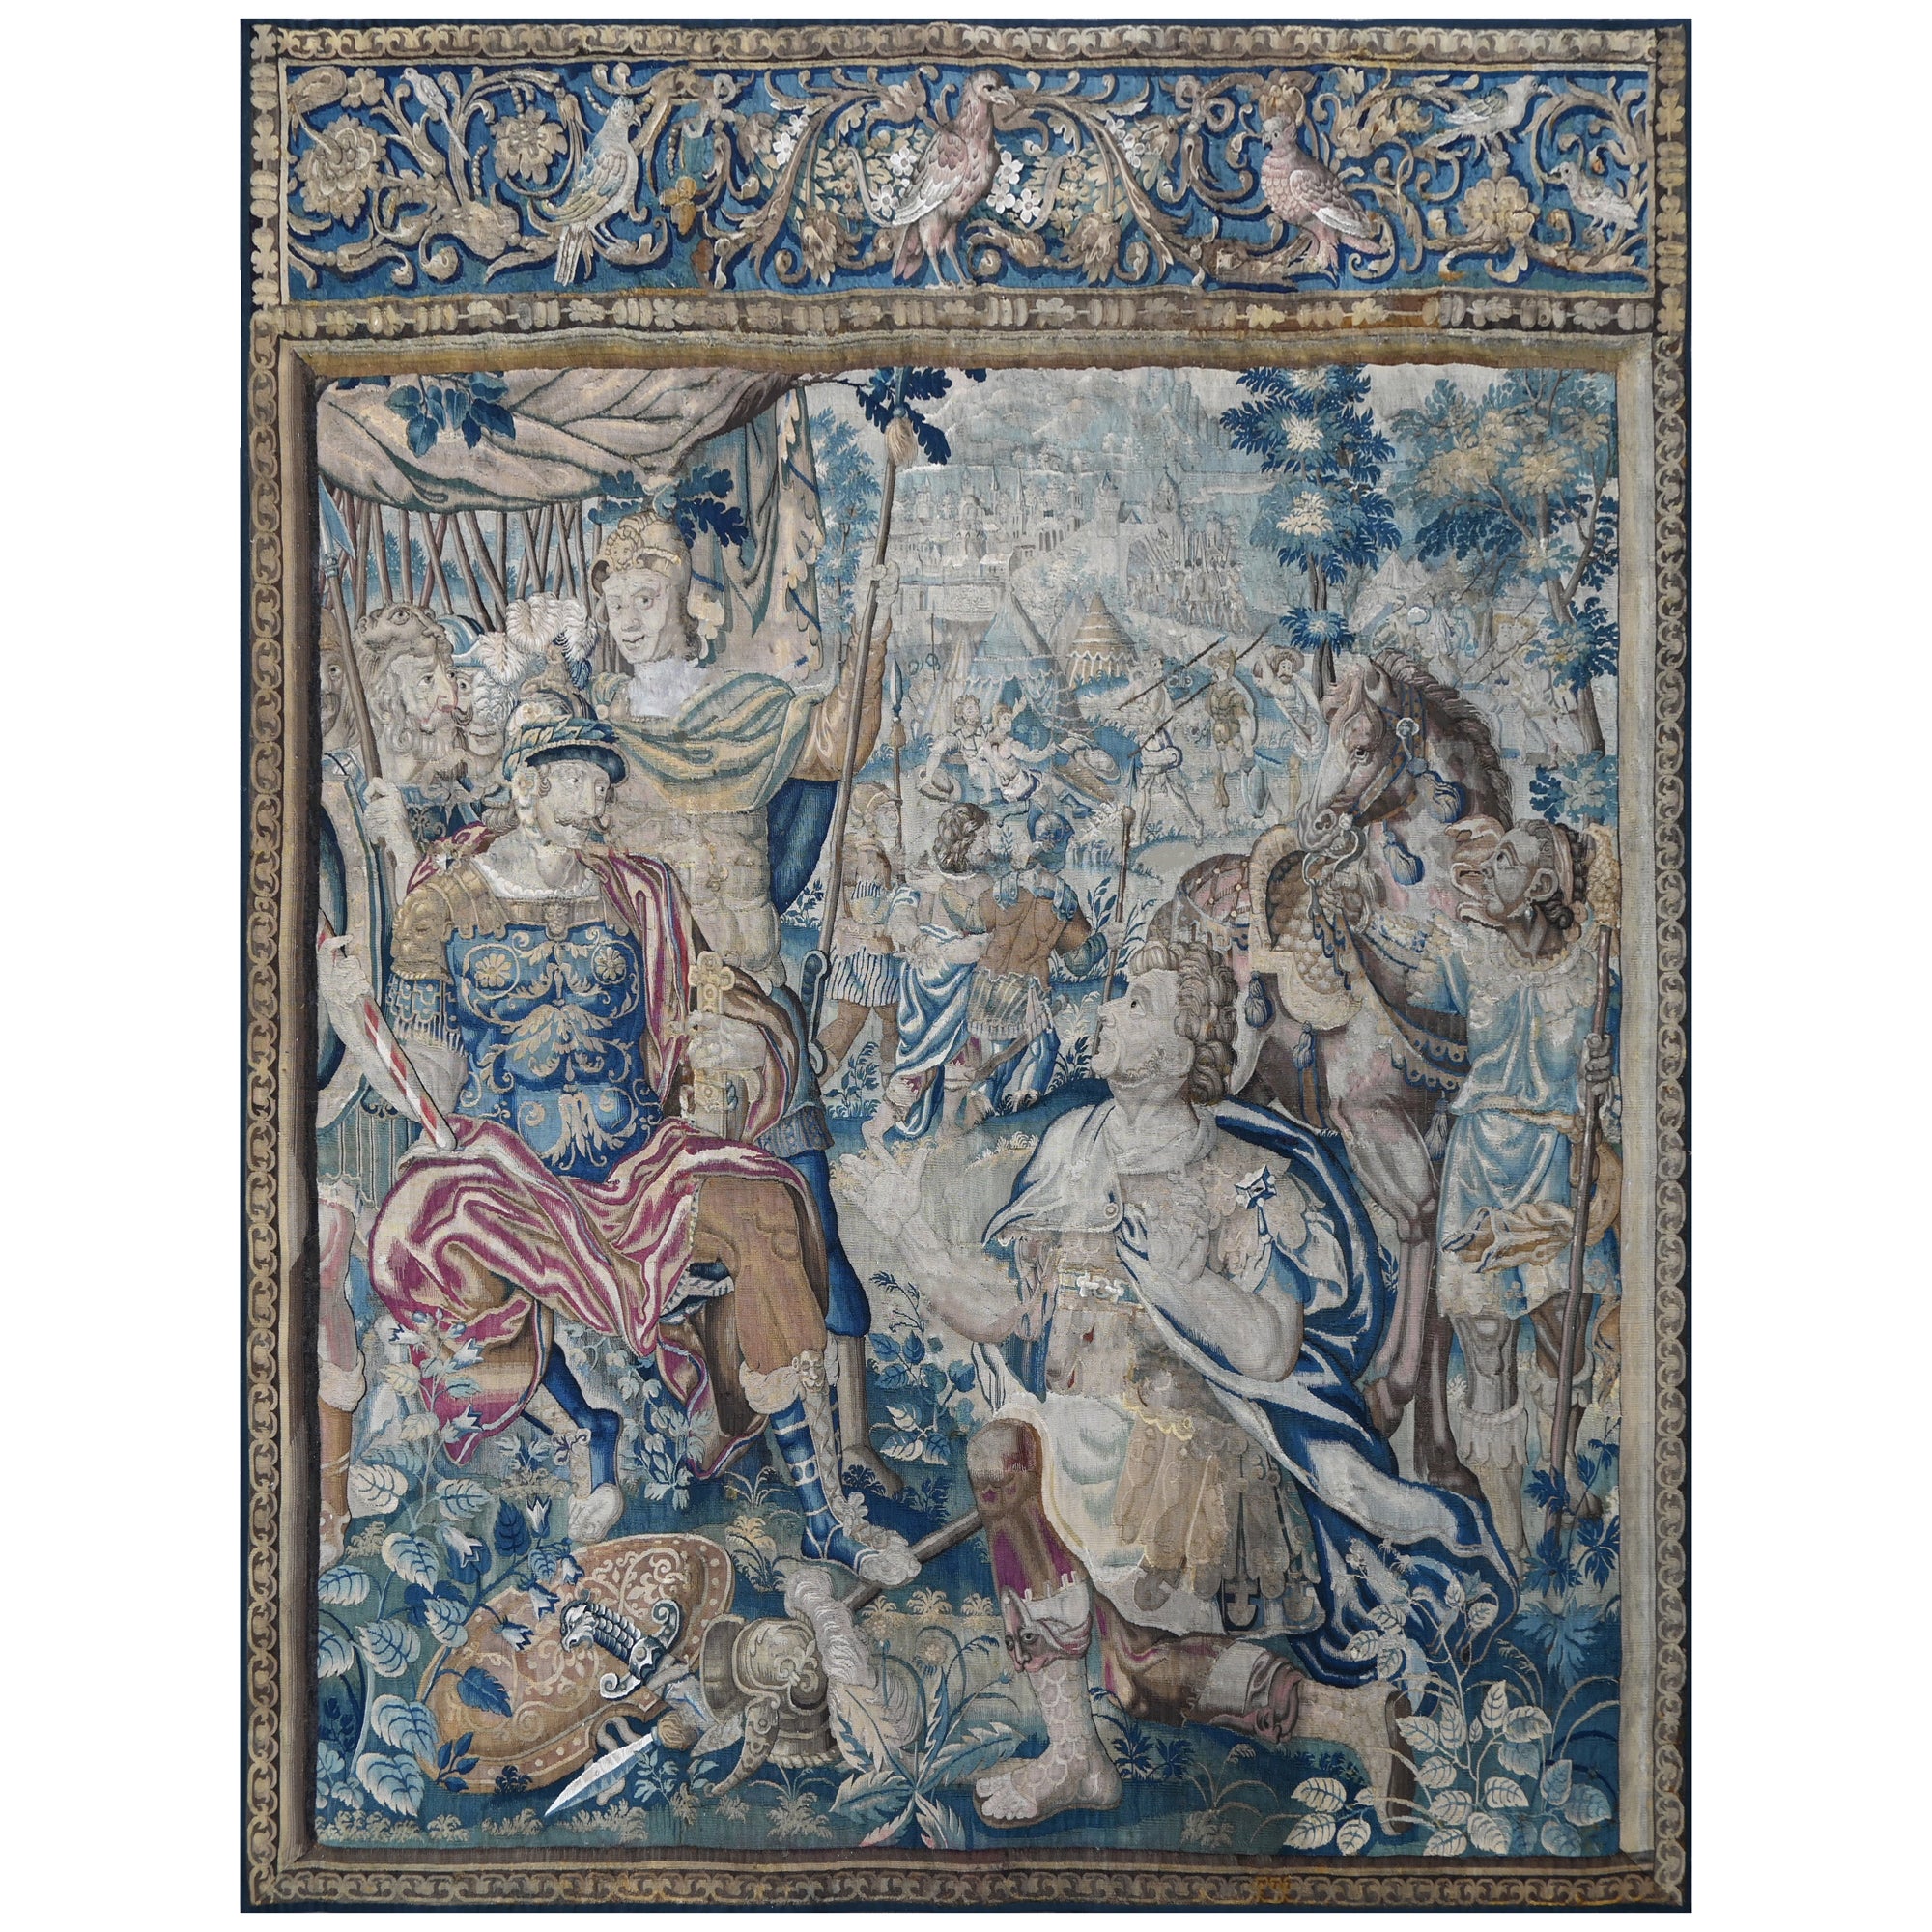 Tapestry From Brussels Manufacture - Mid 17th Century - L2m40xh2m80 - N° 1375